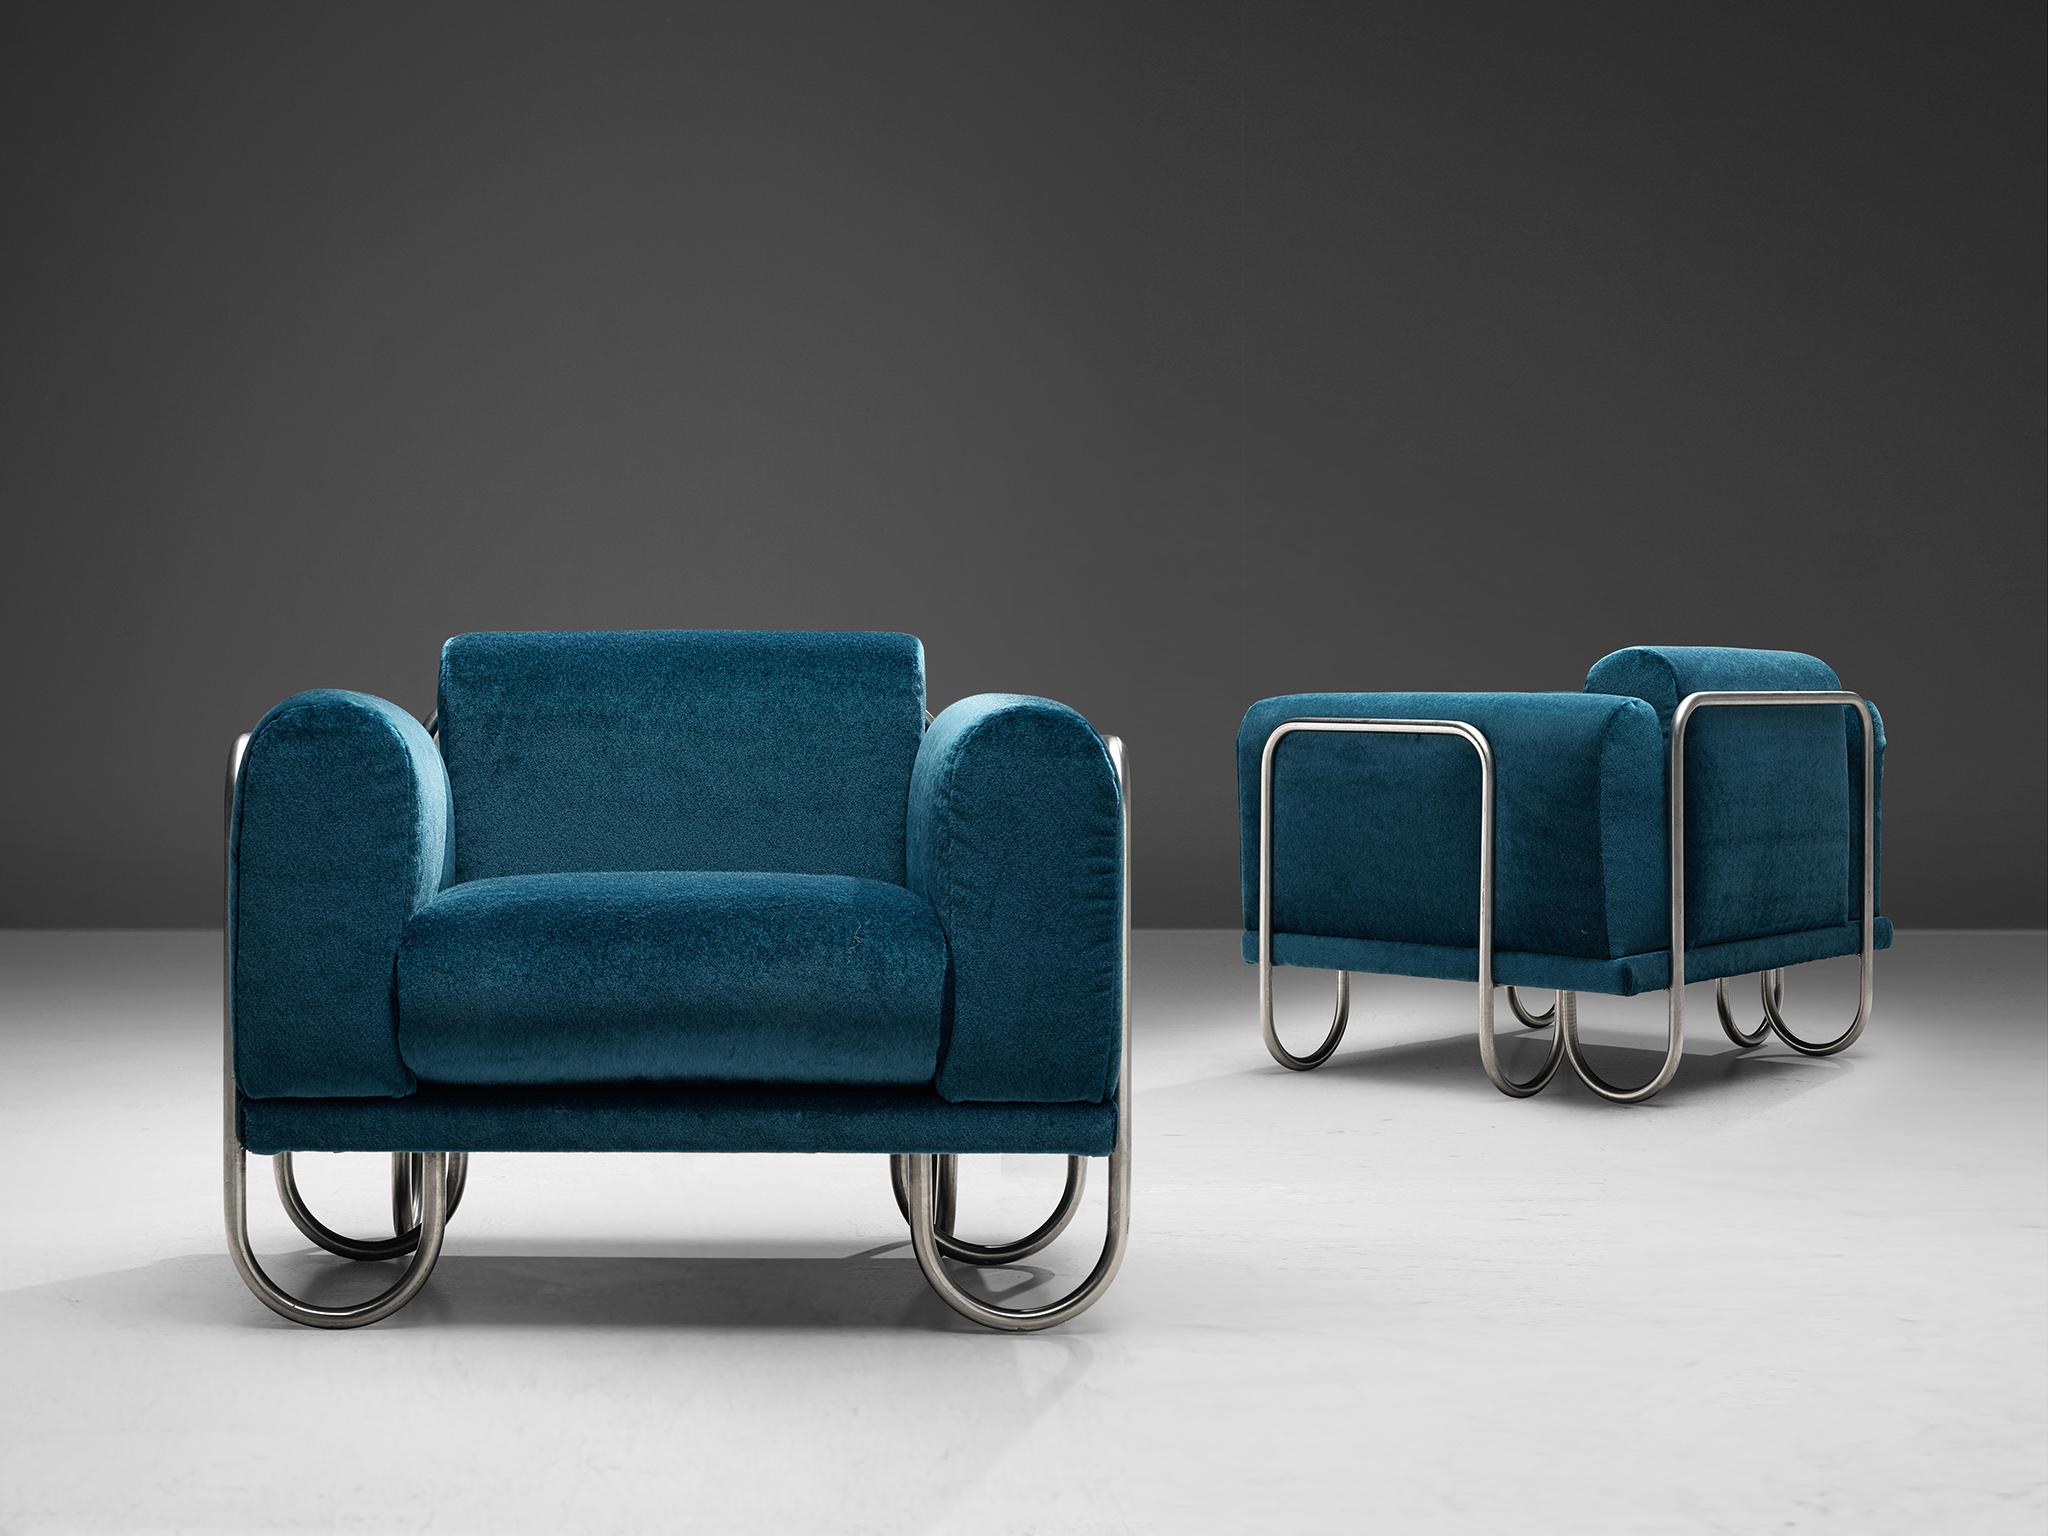 Large set of club chairs, fabric and metal, France, 1970s

A set of comfortable, reupholstered easy chairs that features a curved, chromed tubular frame. The frame appears to be an on-going curved line, moving upwards to support the cushions and